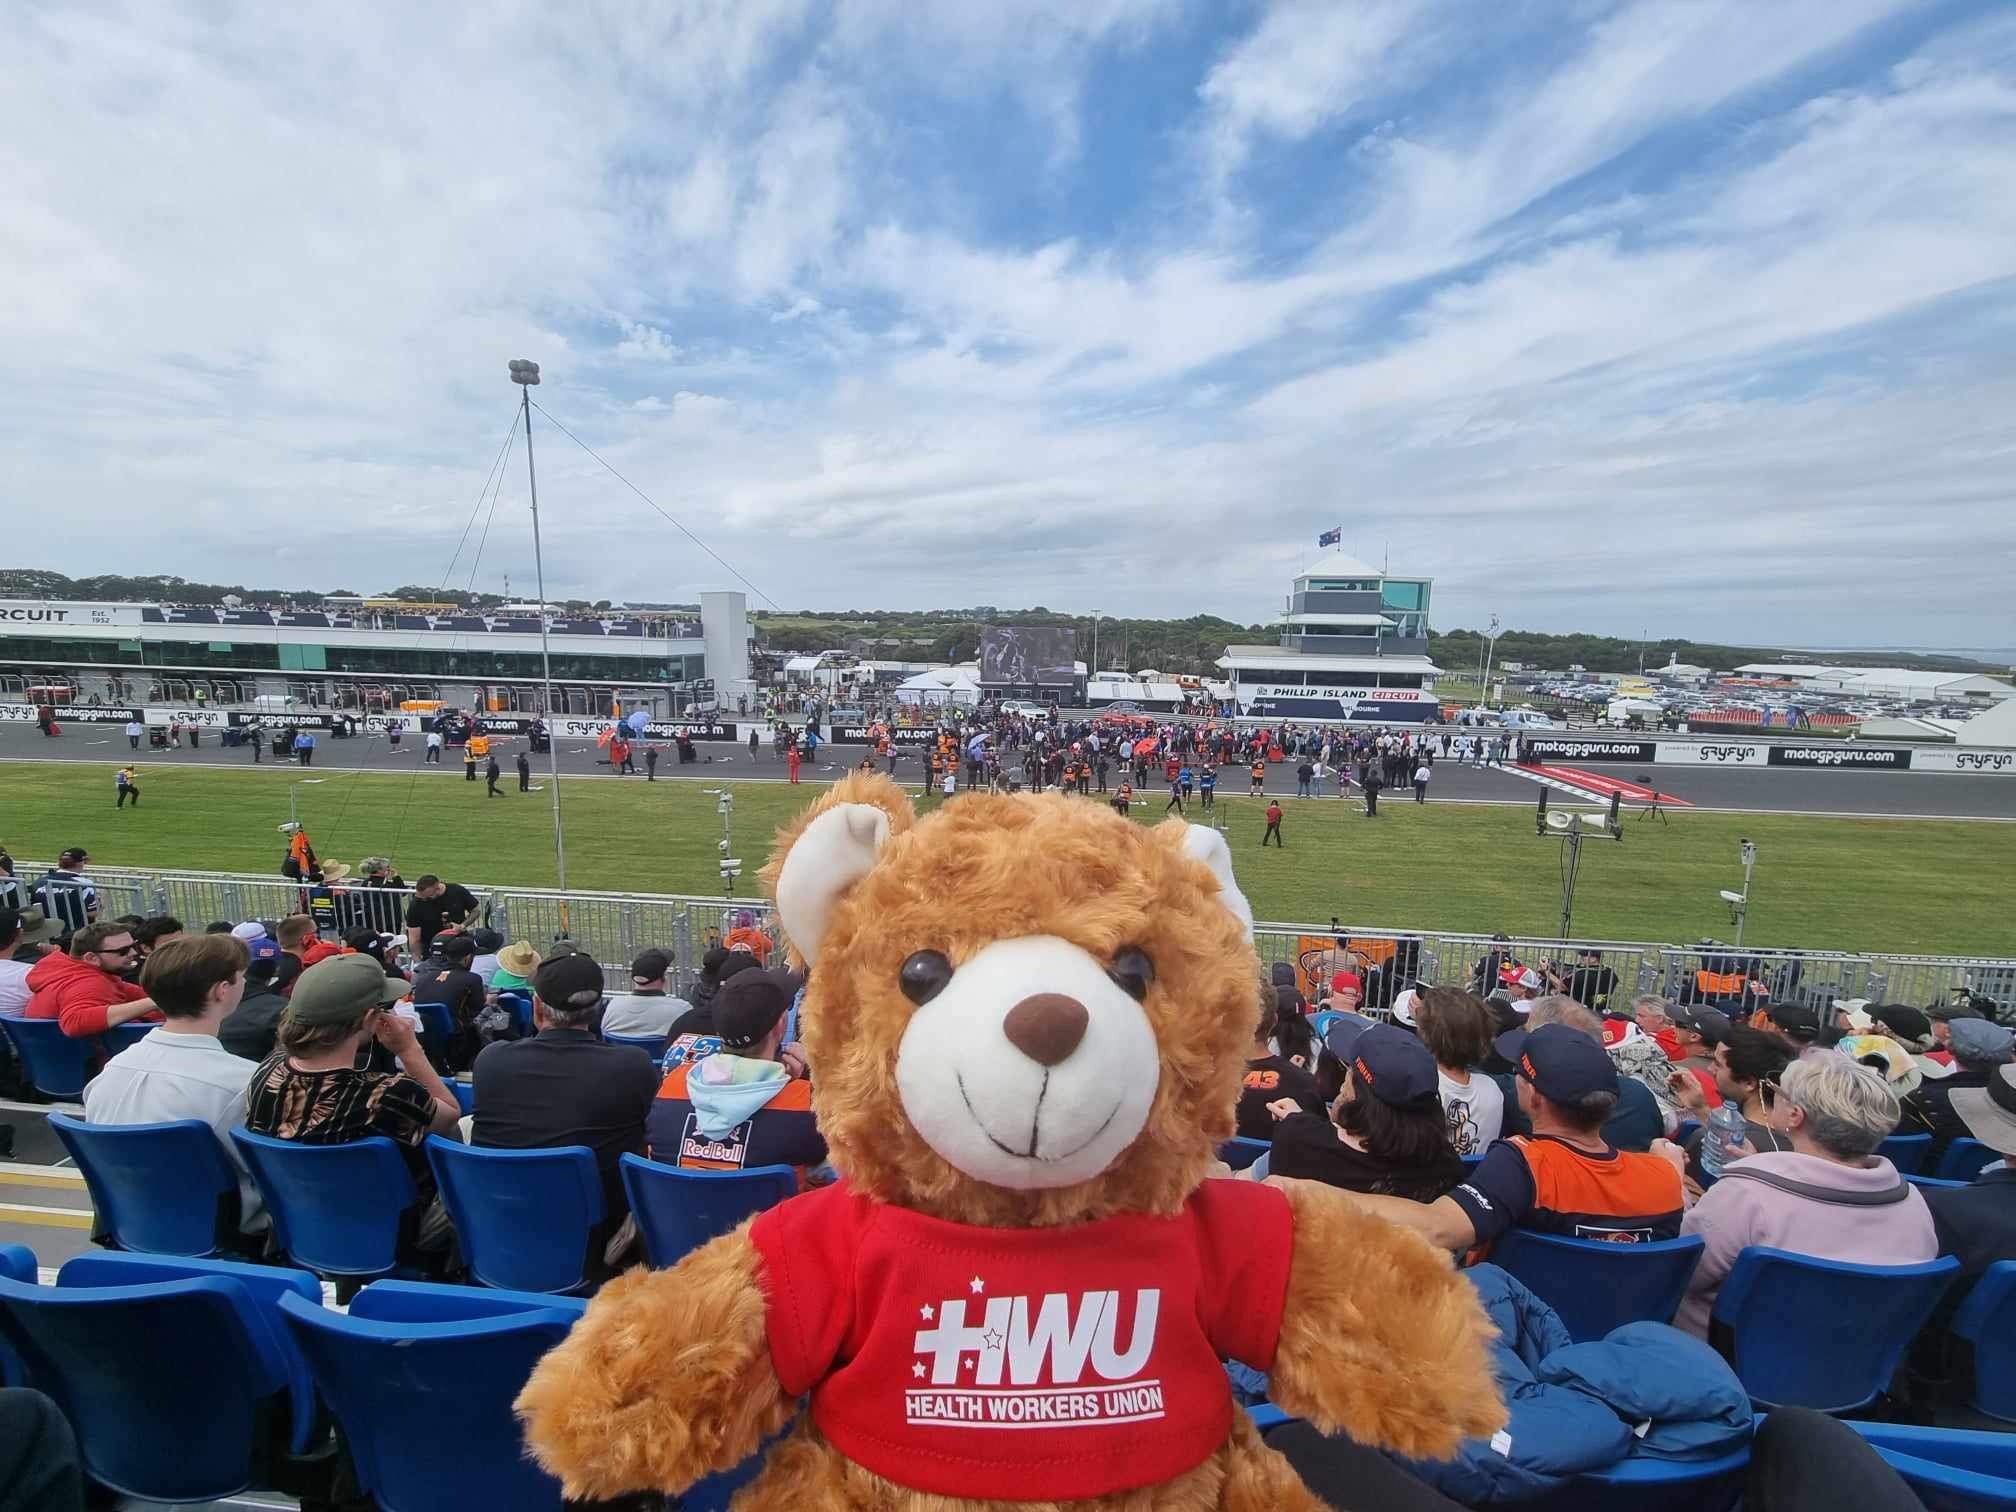 Spotted at Aus MotoGP 23 – our mascots weekend away to Phillip Island